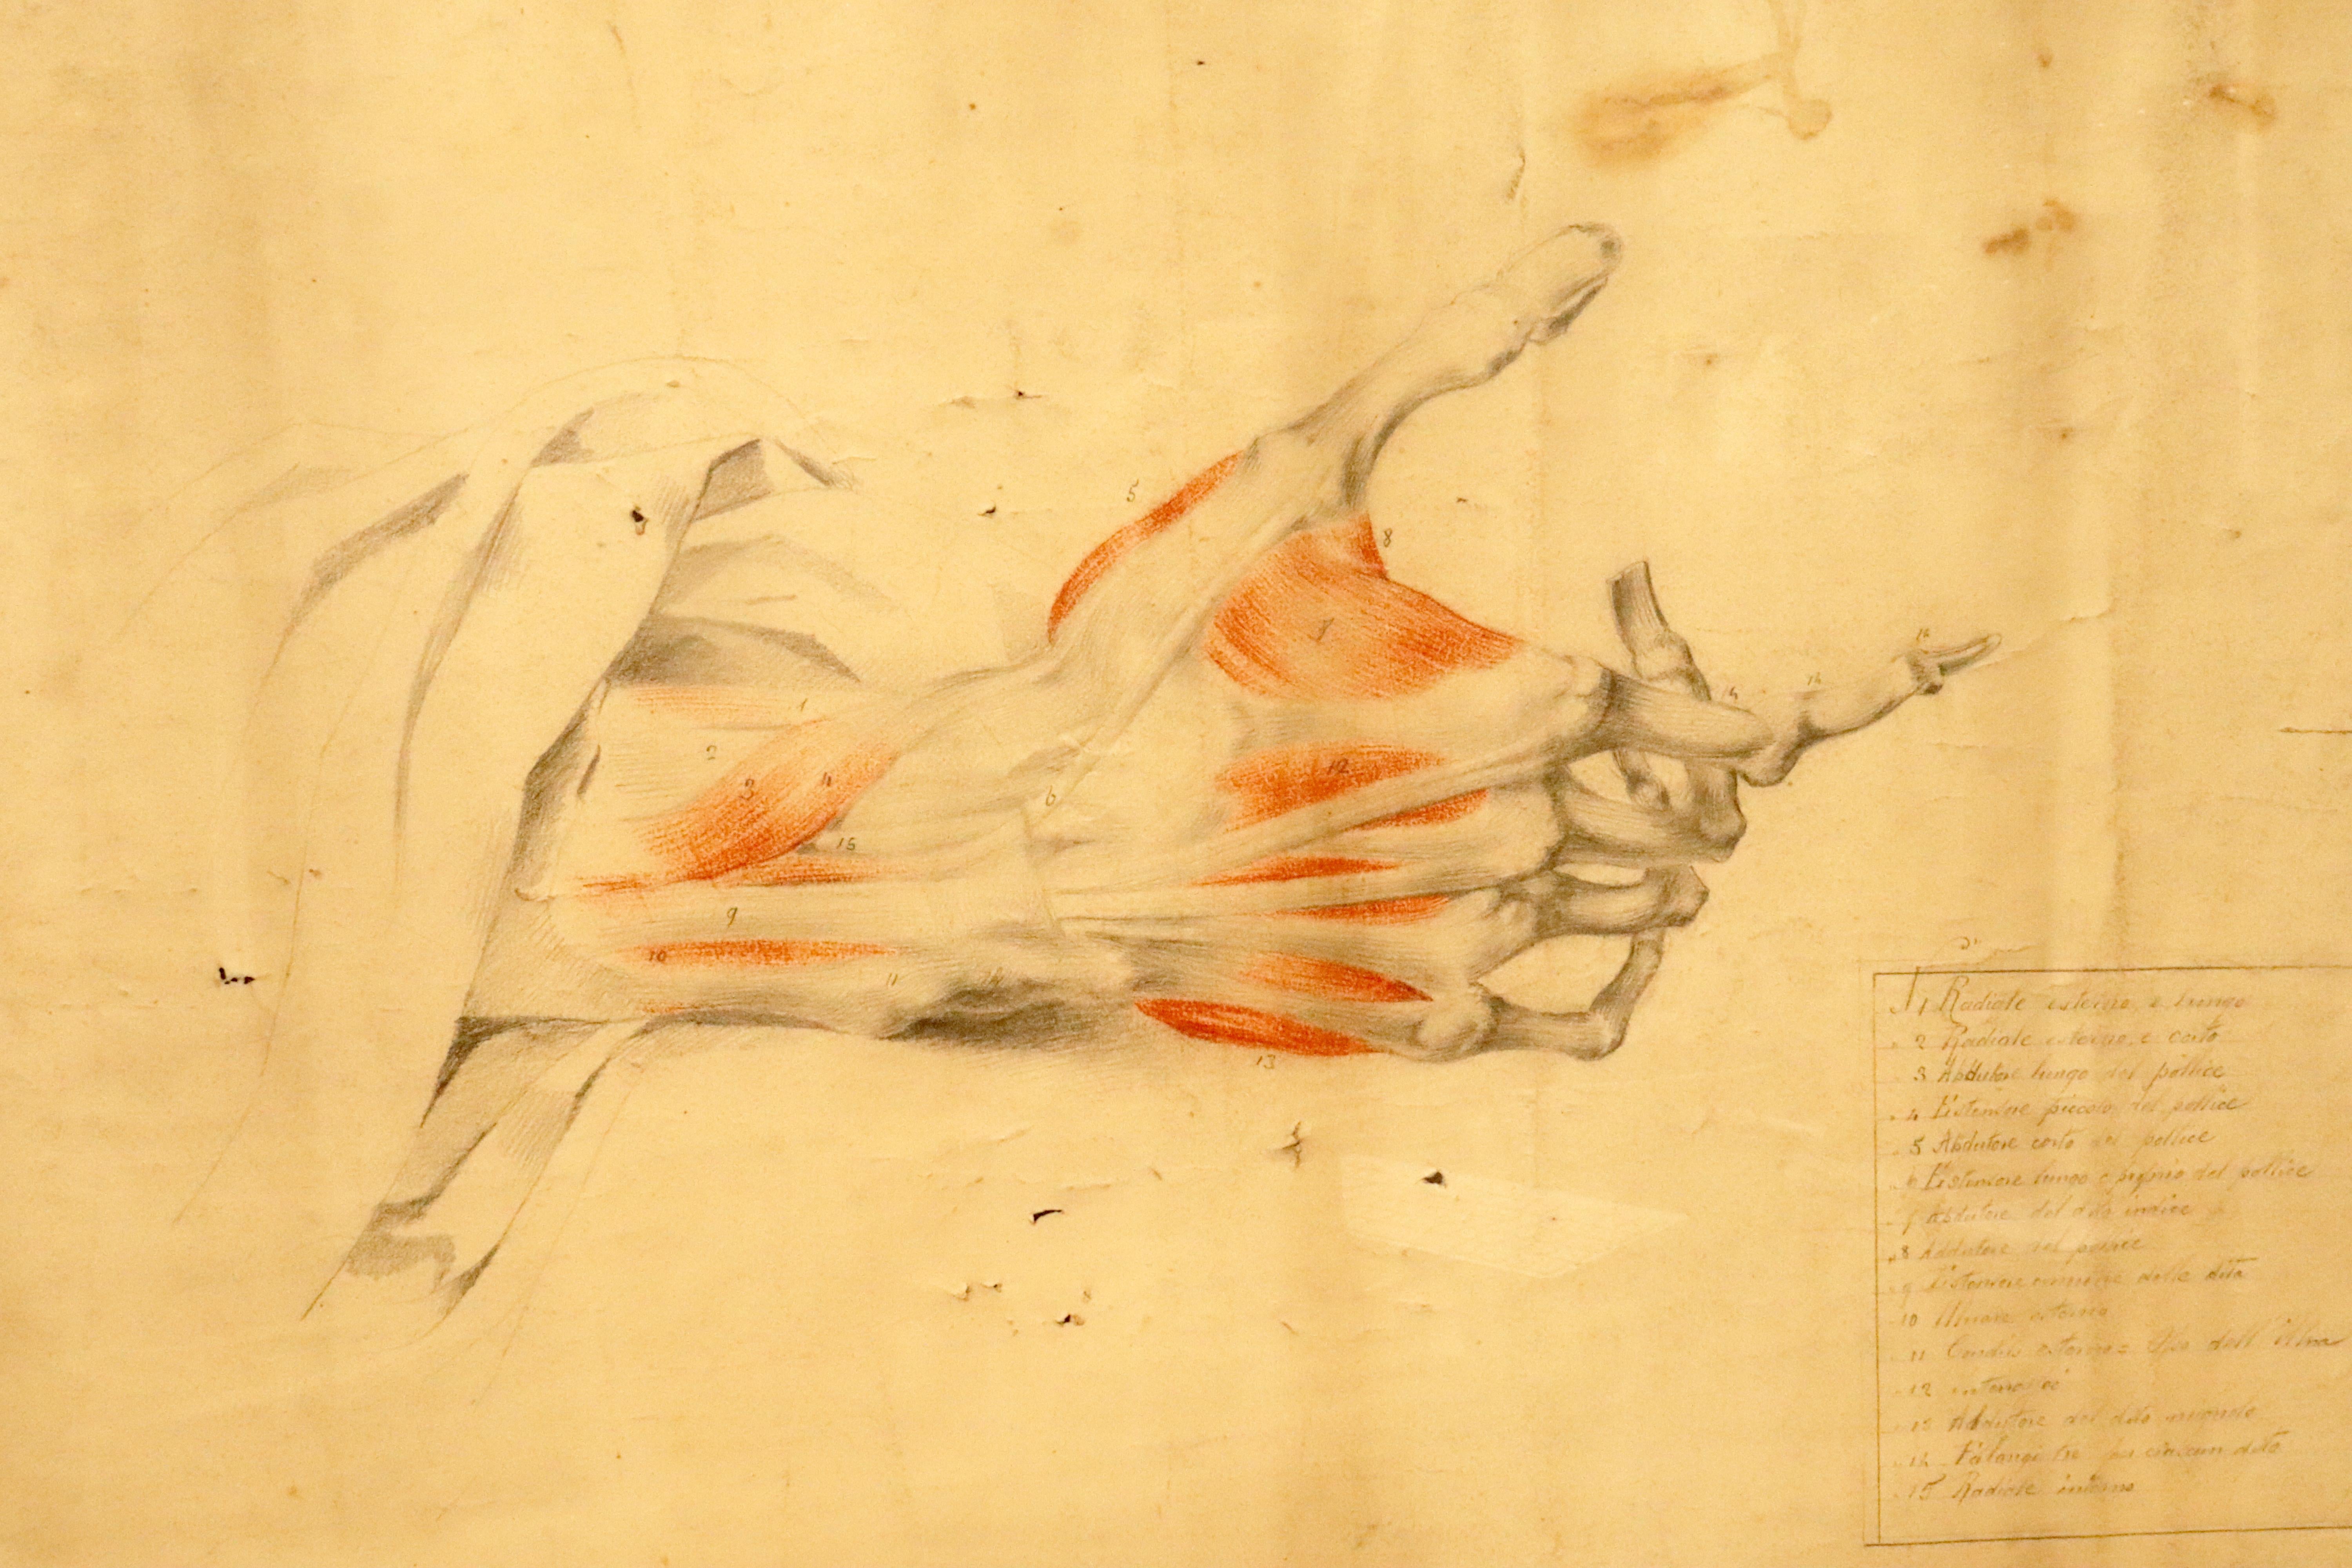 Italian Anatomical drawing of an hand, made in pencil and sanguine, Italy 1879. For Sale